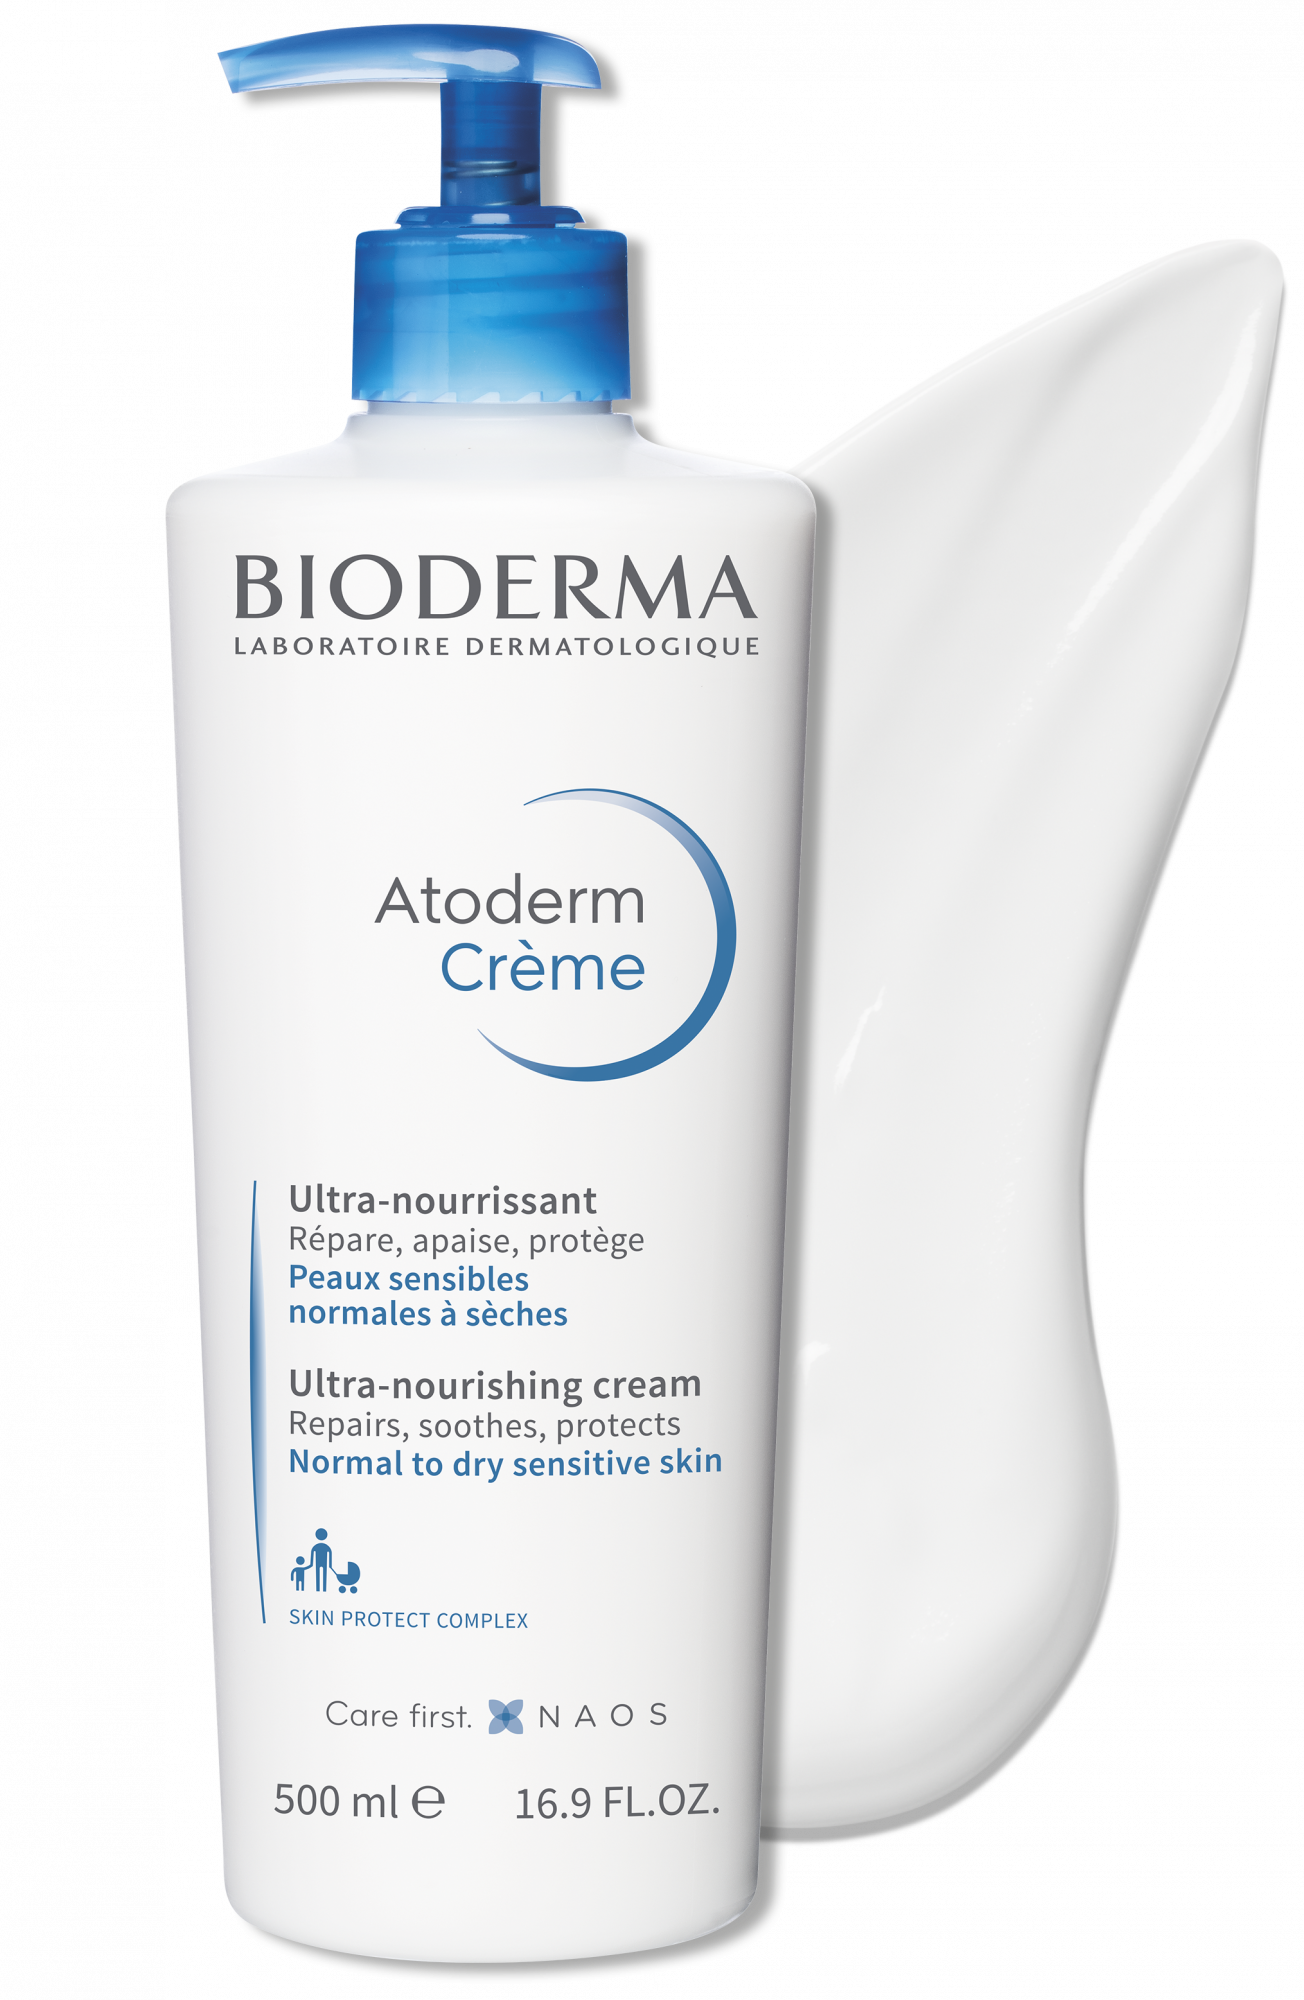 Atoderm Cream | lotion for dry ultra-nourishing